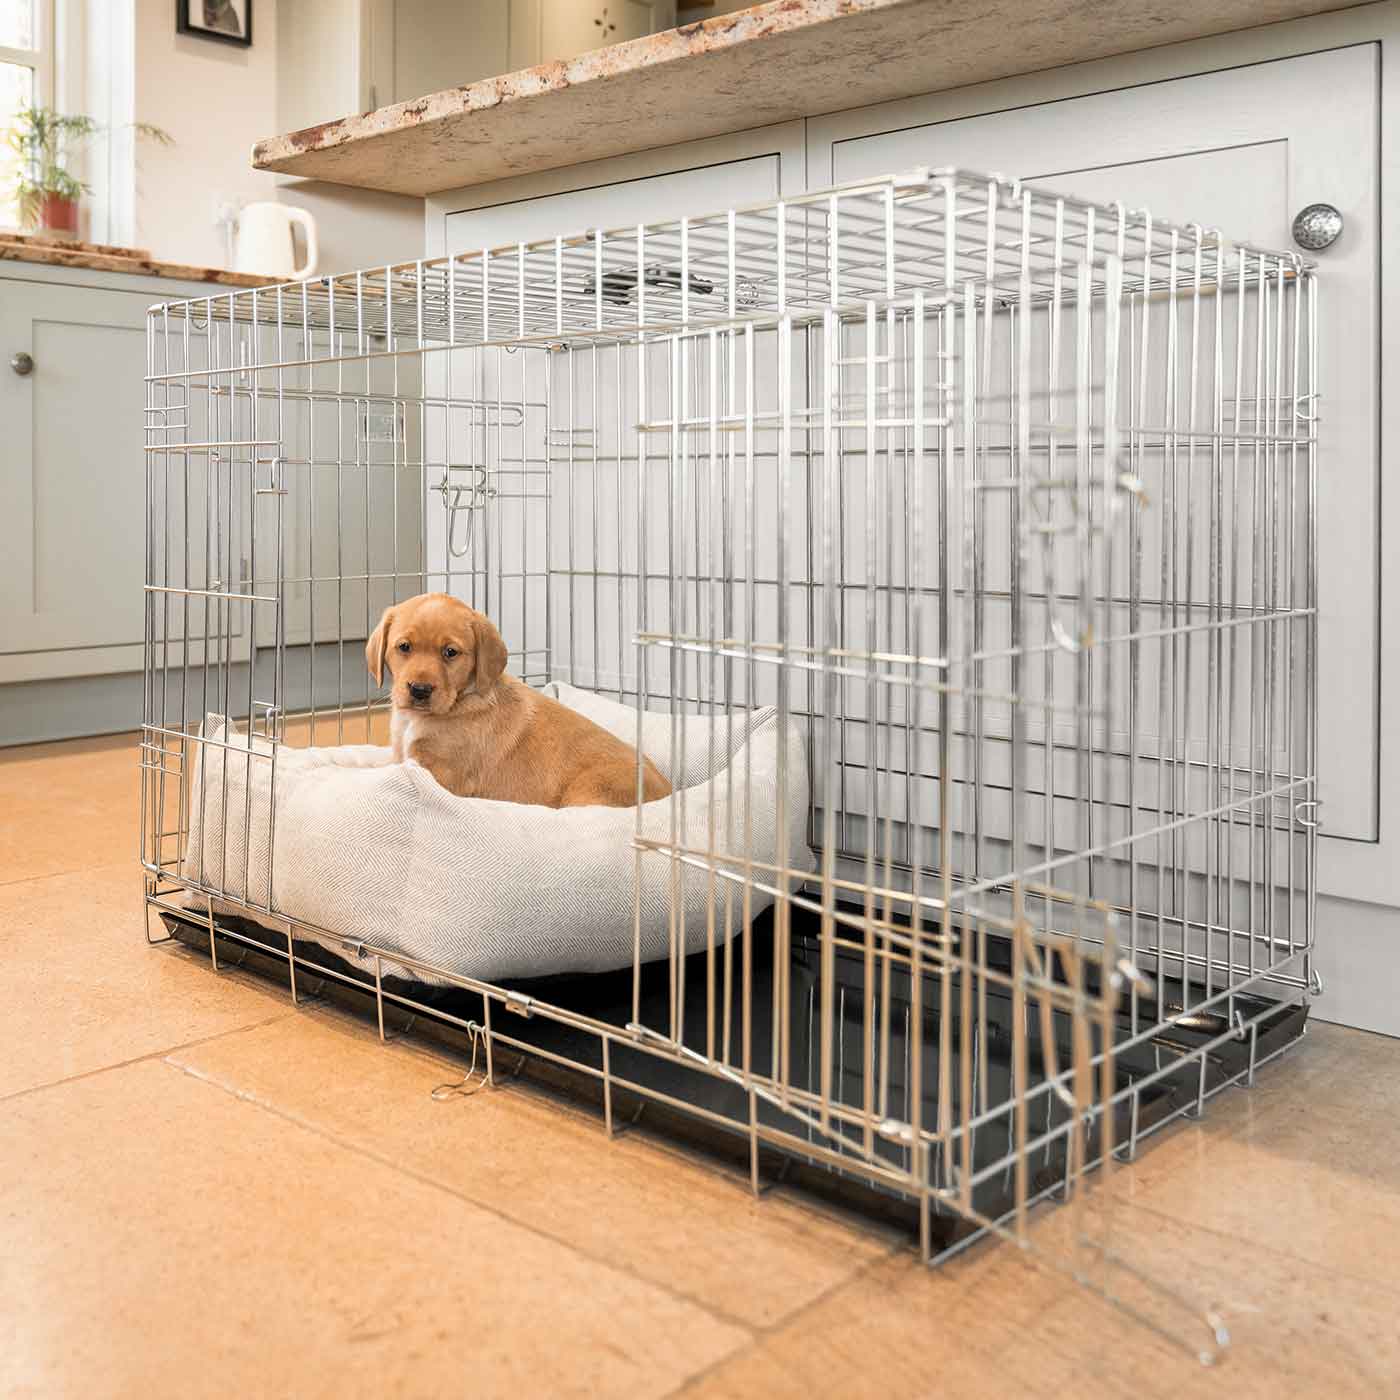  Cosy & Calm Puppy Crate Bed, The Perfect Dog Crate Accessory For The Ultimate Dog Den! In Stunning Natural Herringbone Tweed! Available Now at Lords & Labradors